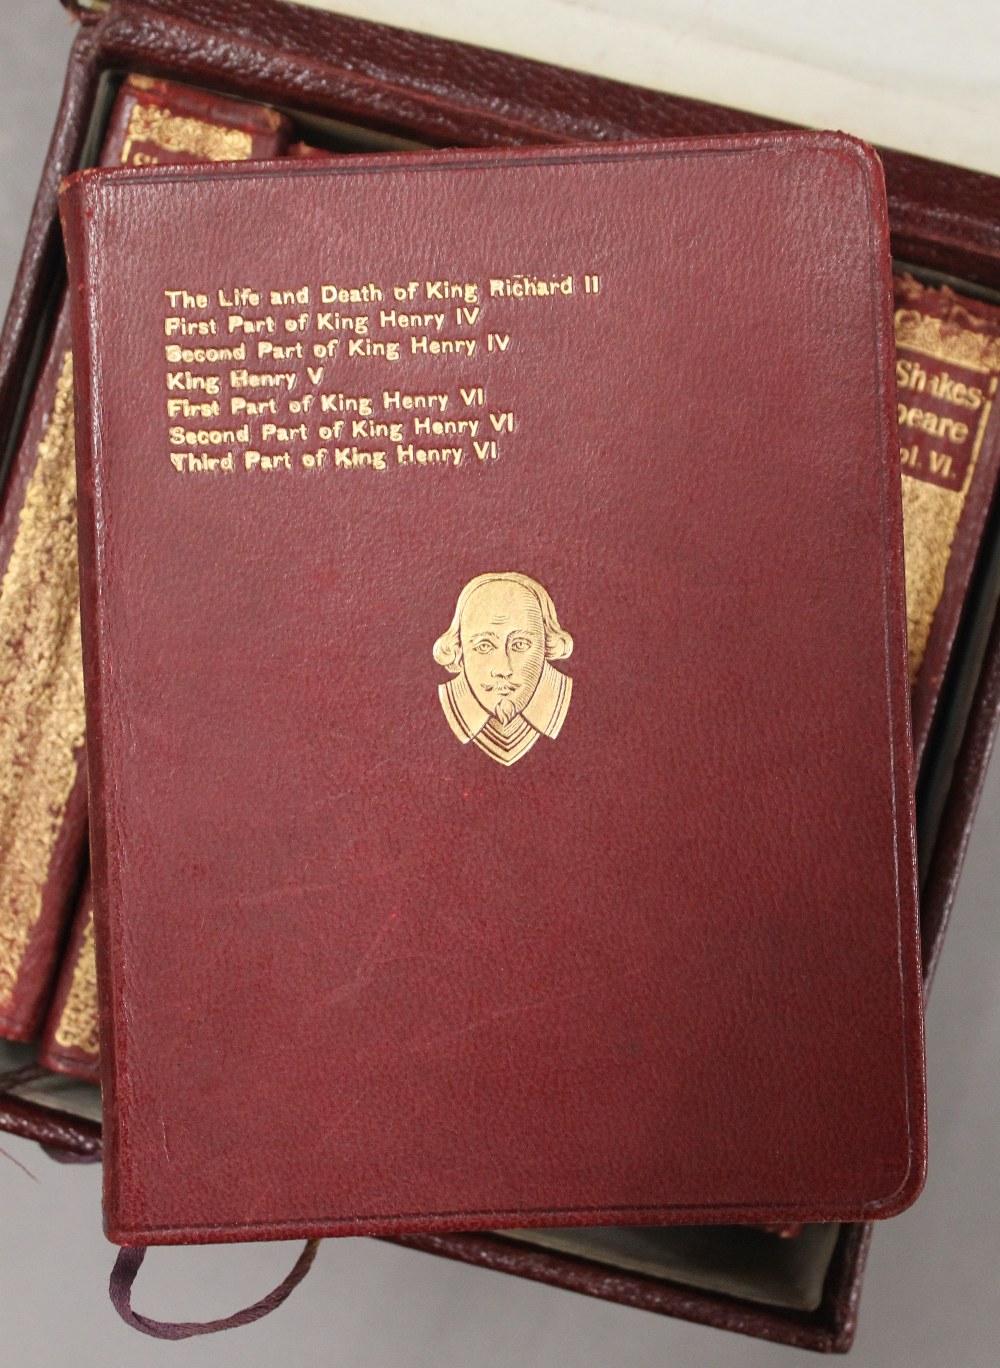 A boxed set of The Complete Works of William Shakespeare in the first Collins Clearprint edition of - Image 3 of 4